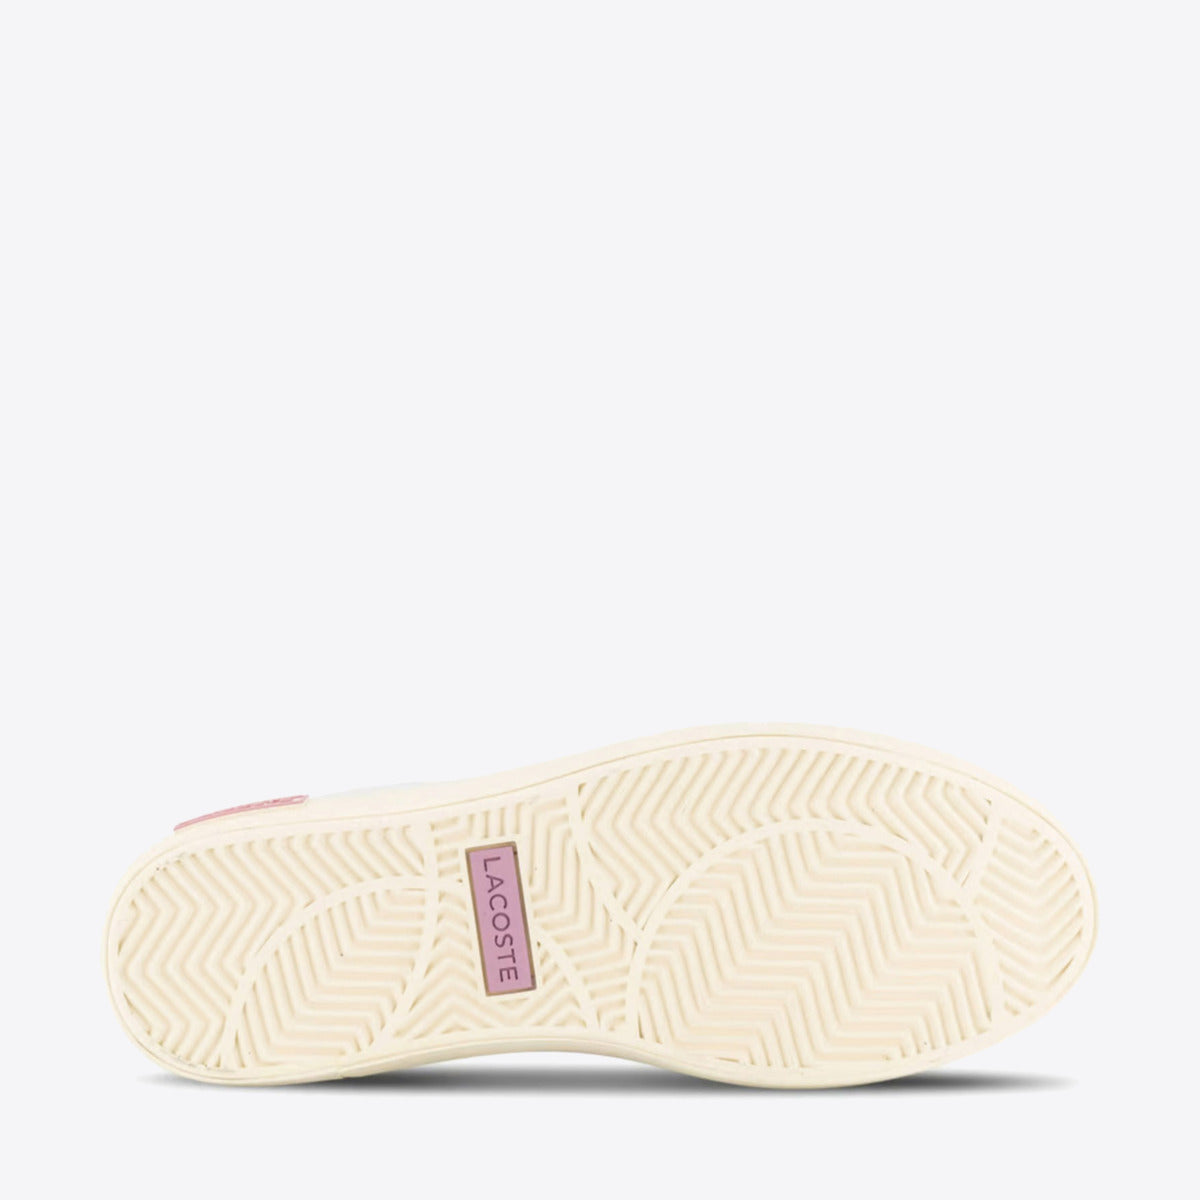 LACOSTE Powercourt 2.0 White/Pink - Image 3